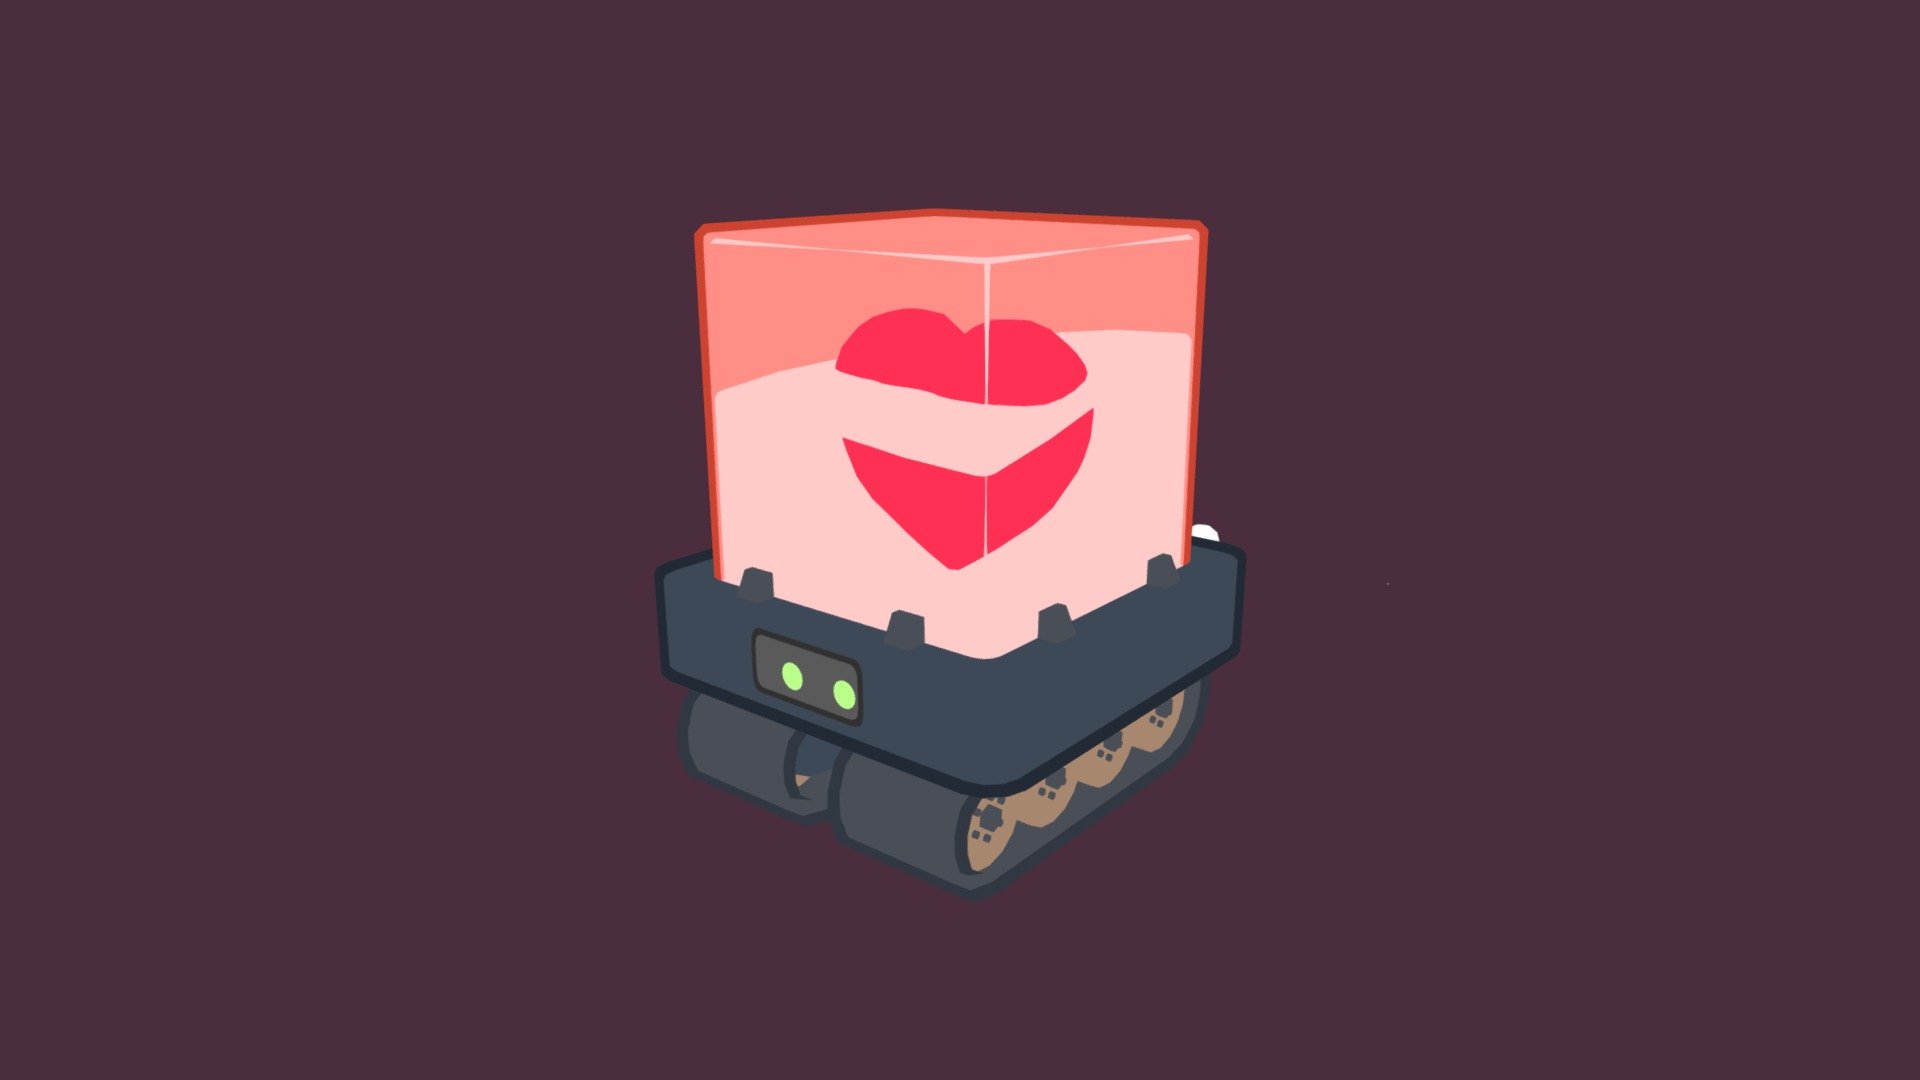 Submission for #sketchfabweeklychallenge
Week 3: Heart

Wanted to do a mix of 2D-3D animation whith this piece, but could not get the 2D animations to work correctly. Please check my twitter post here, if you want to see the 2D elements 3d model